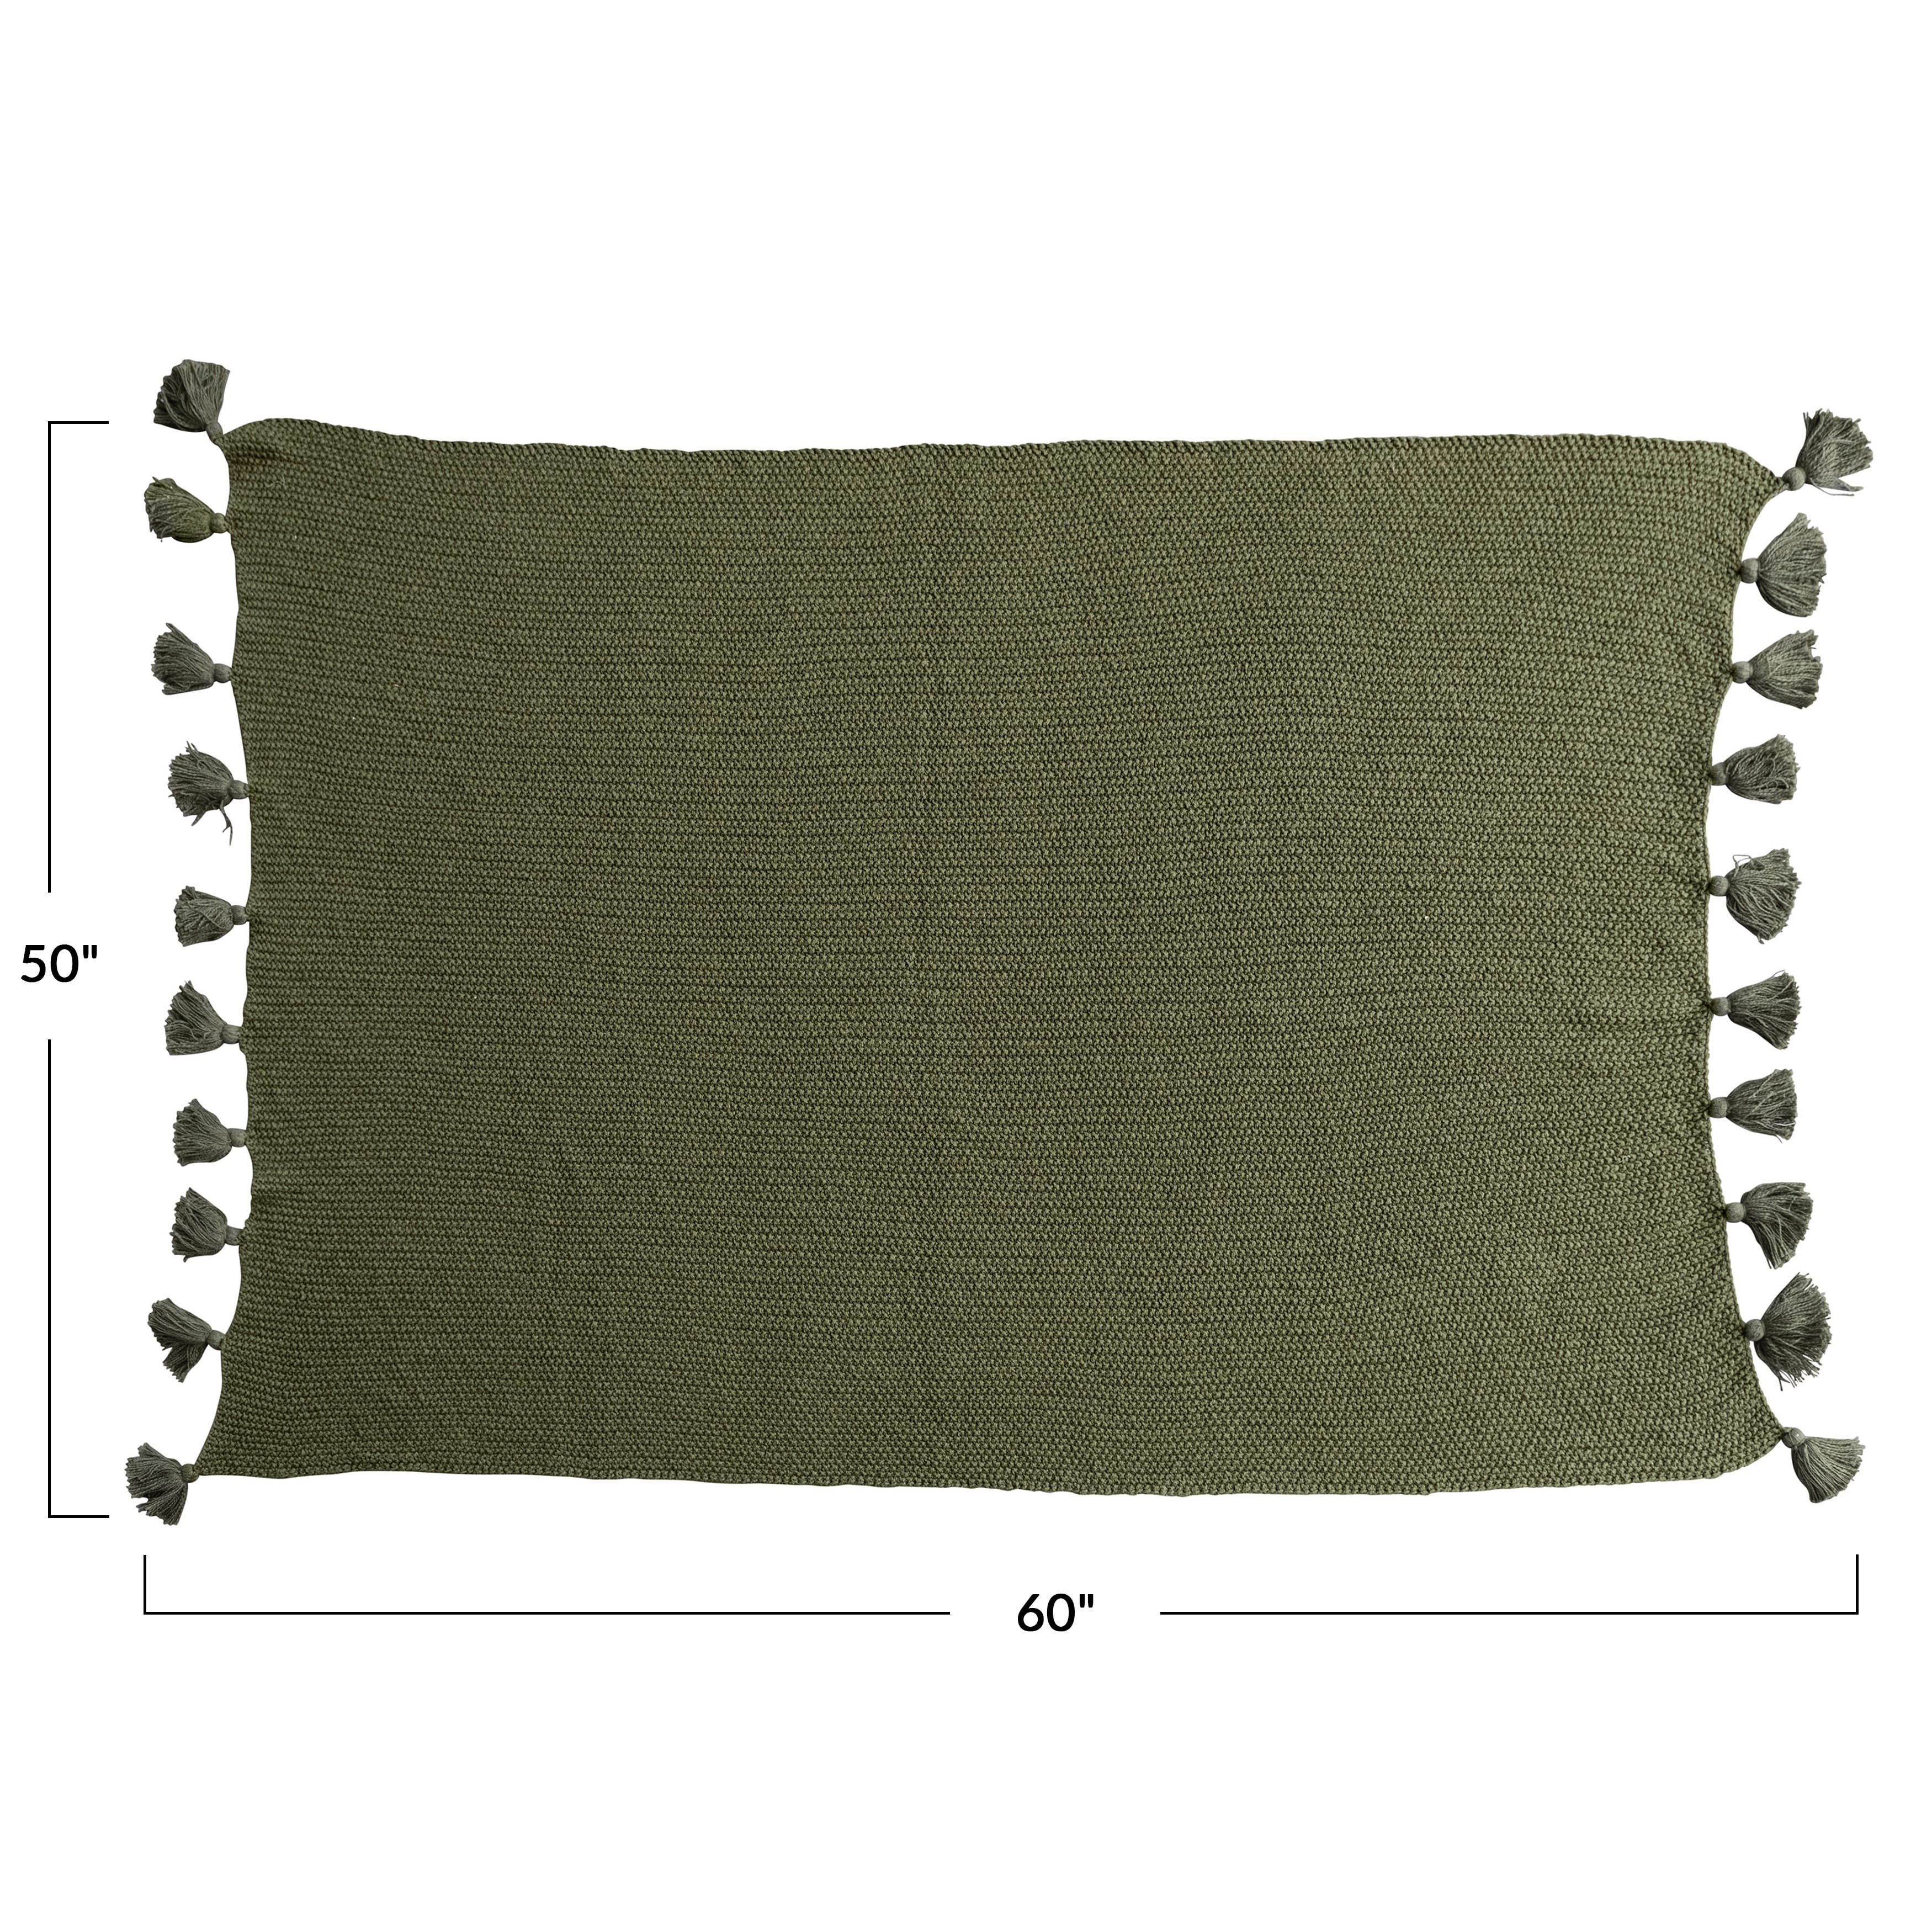 Olive Green Knit Throw Blanket with Tassels